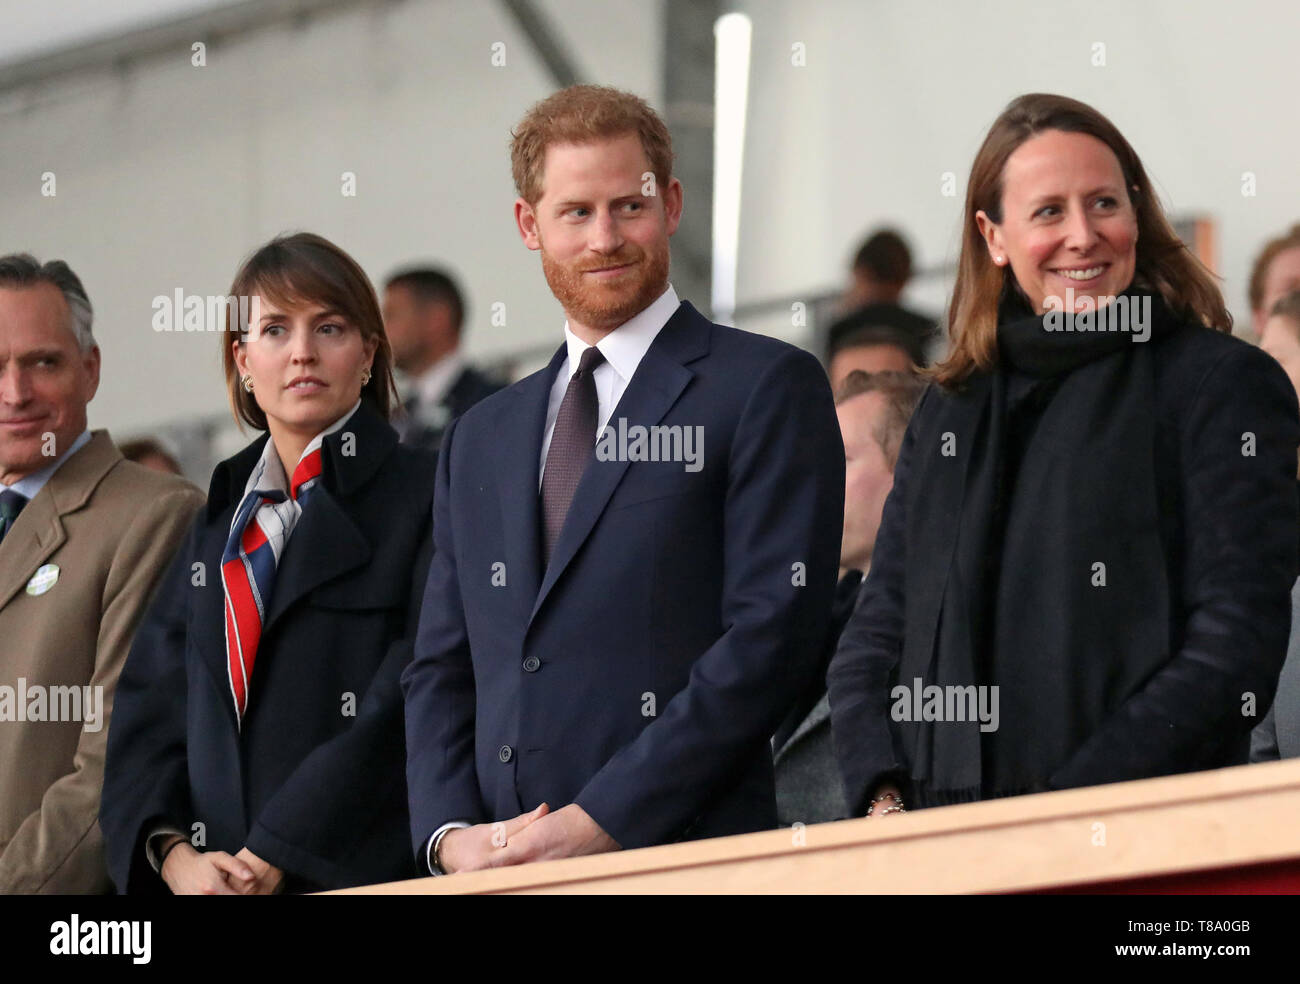 The Duke of Sussex attending the Pageant at the Royal Windsor Horse Show in the grounds of Windsor Castle. The Pageant marks the 200th anniversary of Queen Victoria's birth. Stock Photo